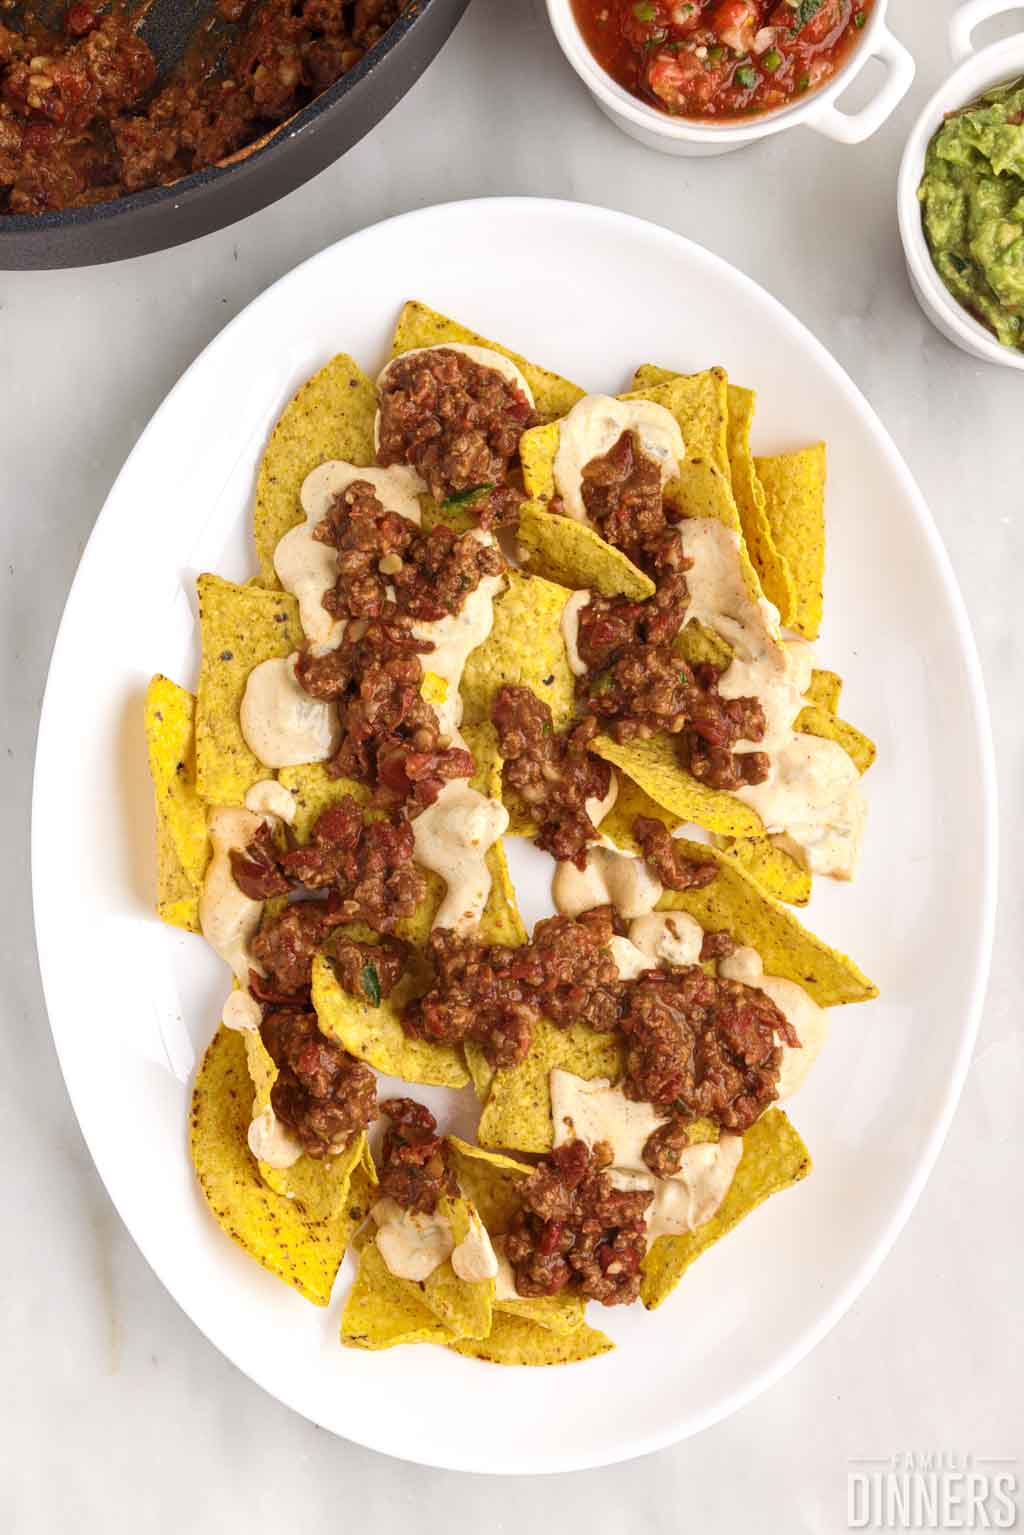 Tortilla chips with beef mixture and cheese.